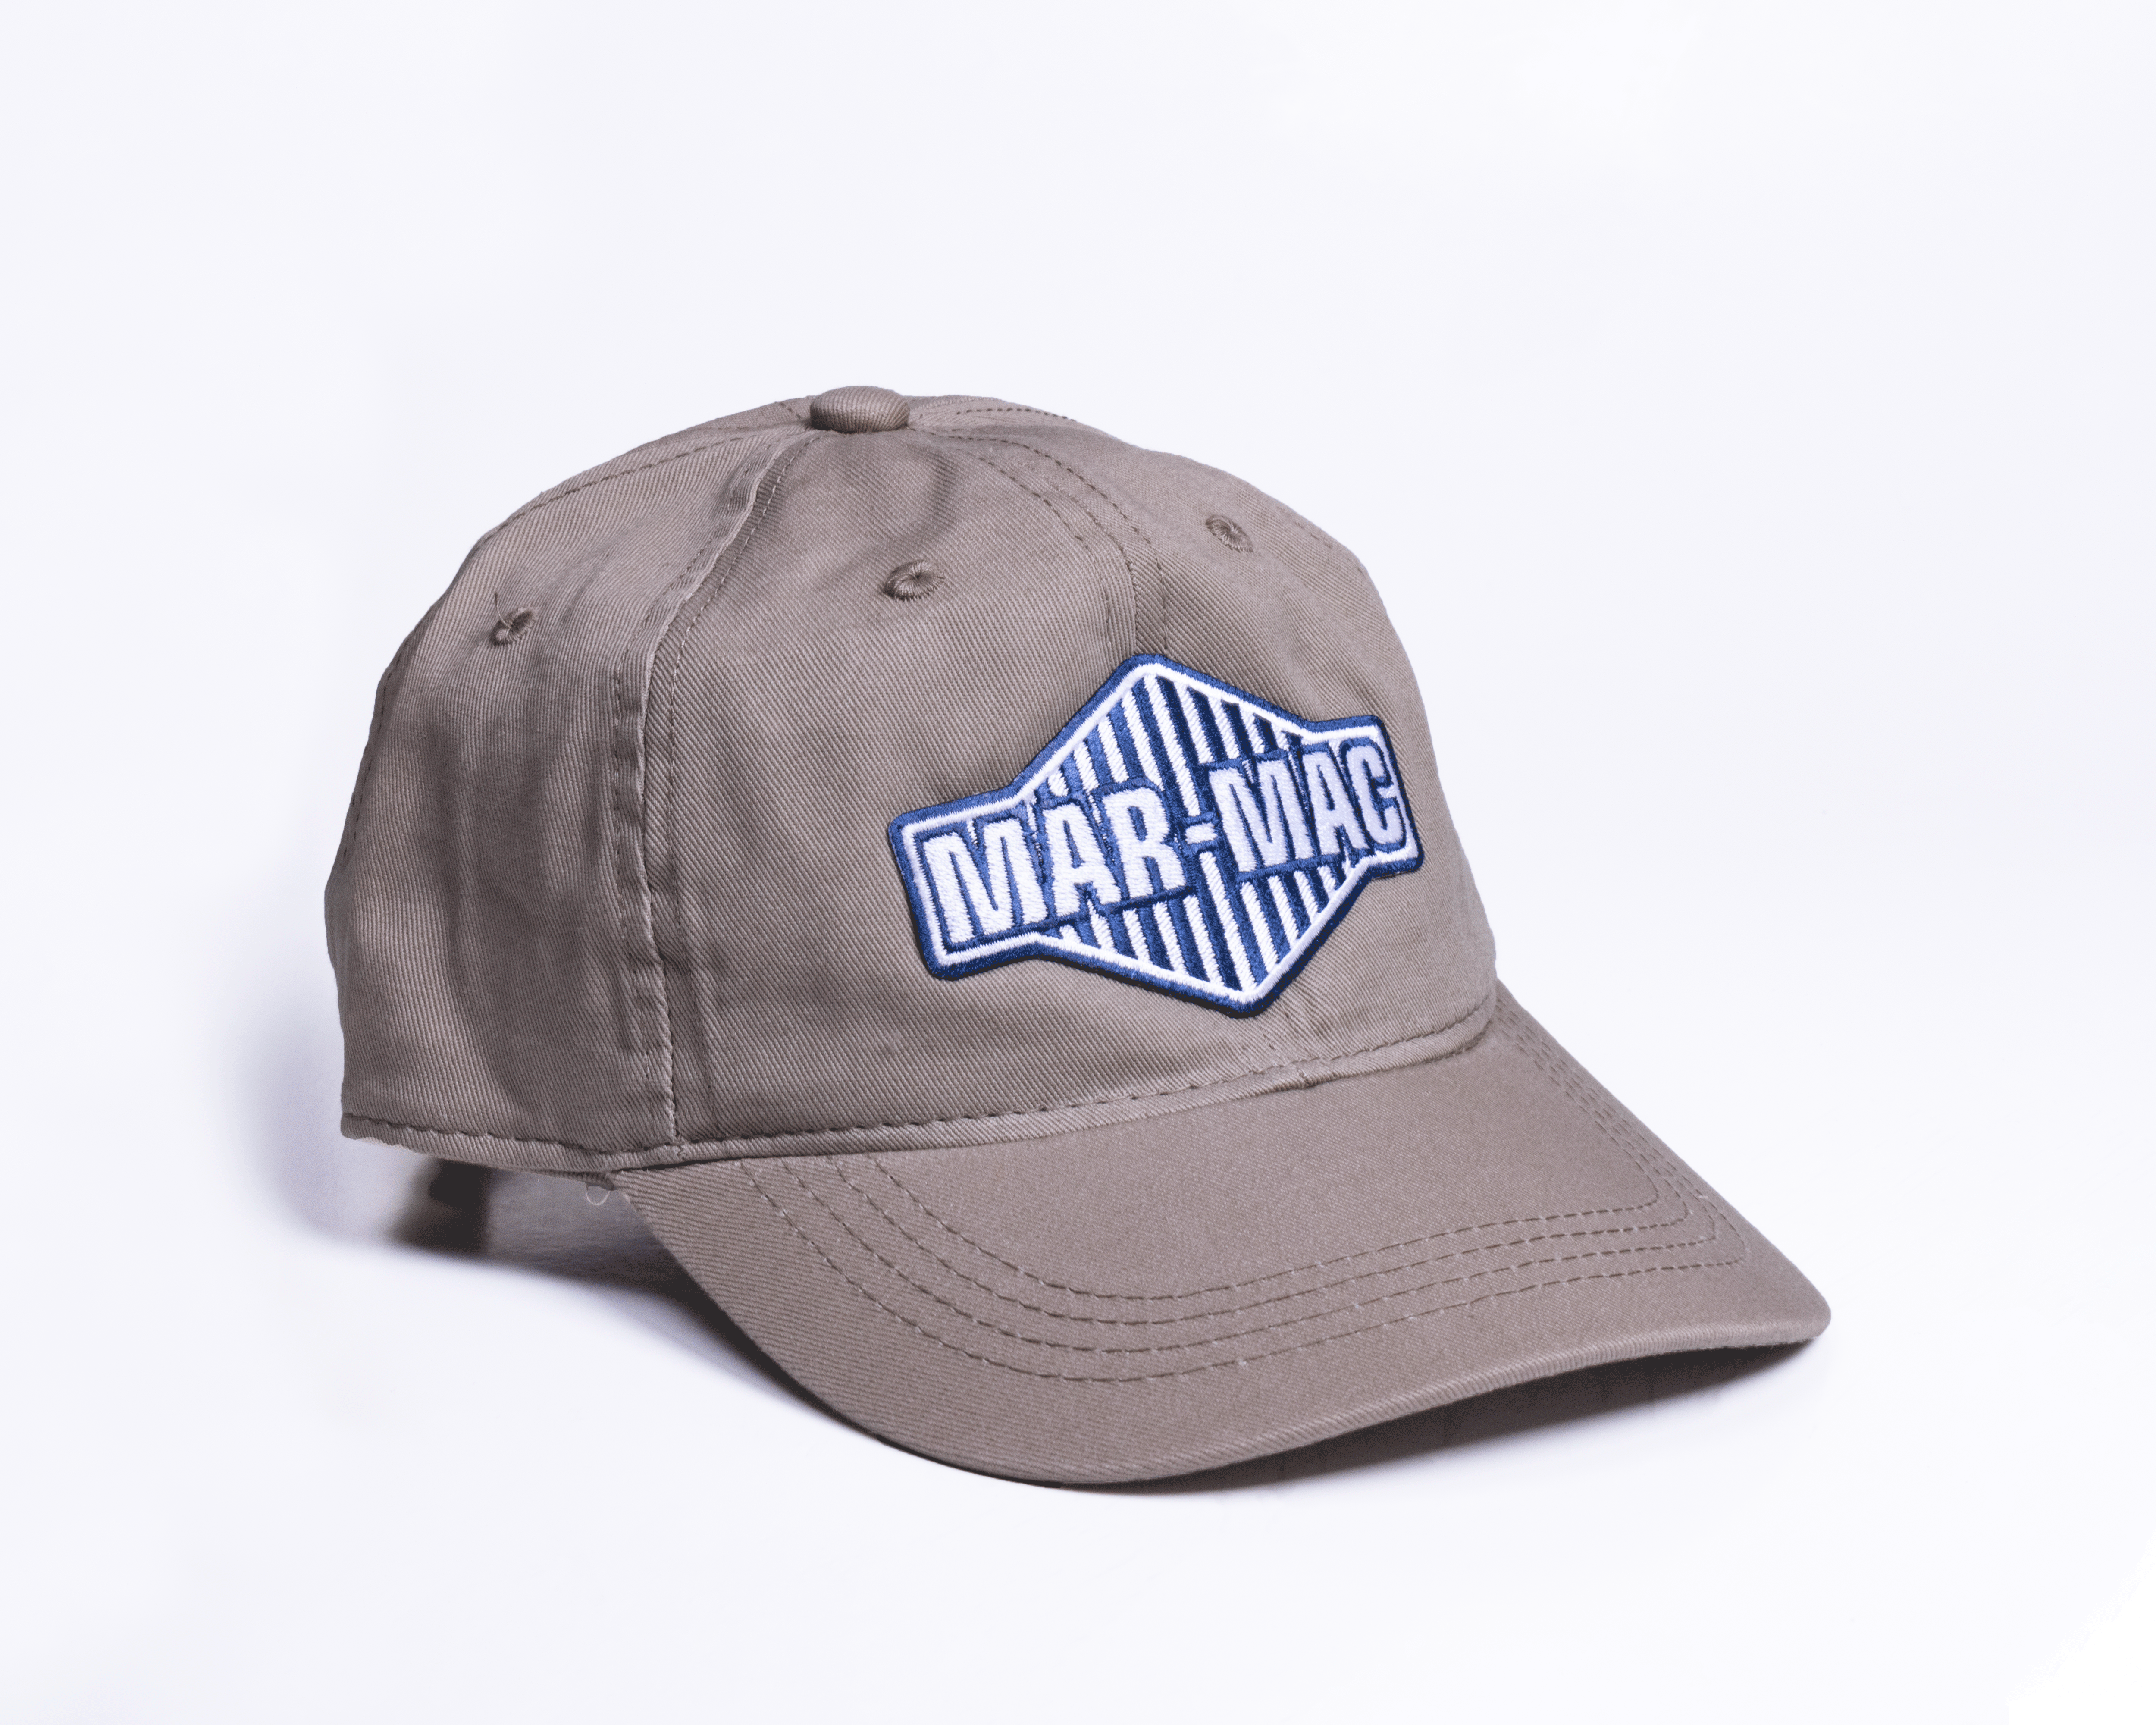 baseball style hat in khaki color with MAR-MAC logo patch